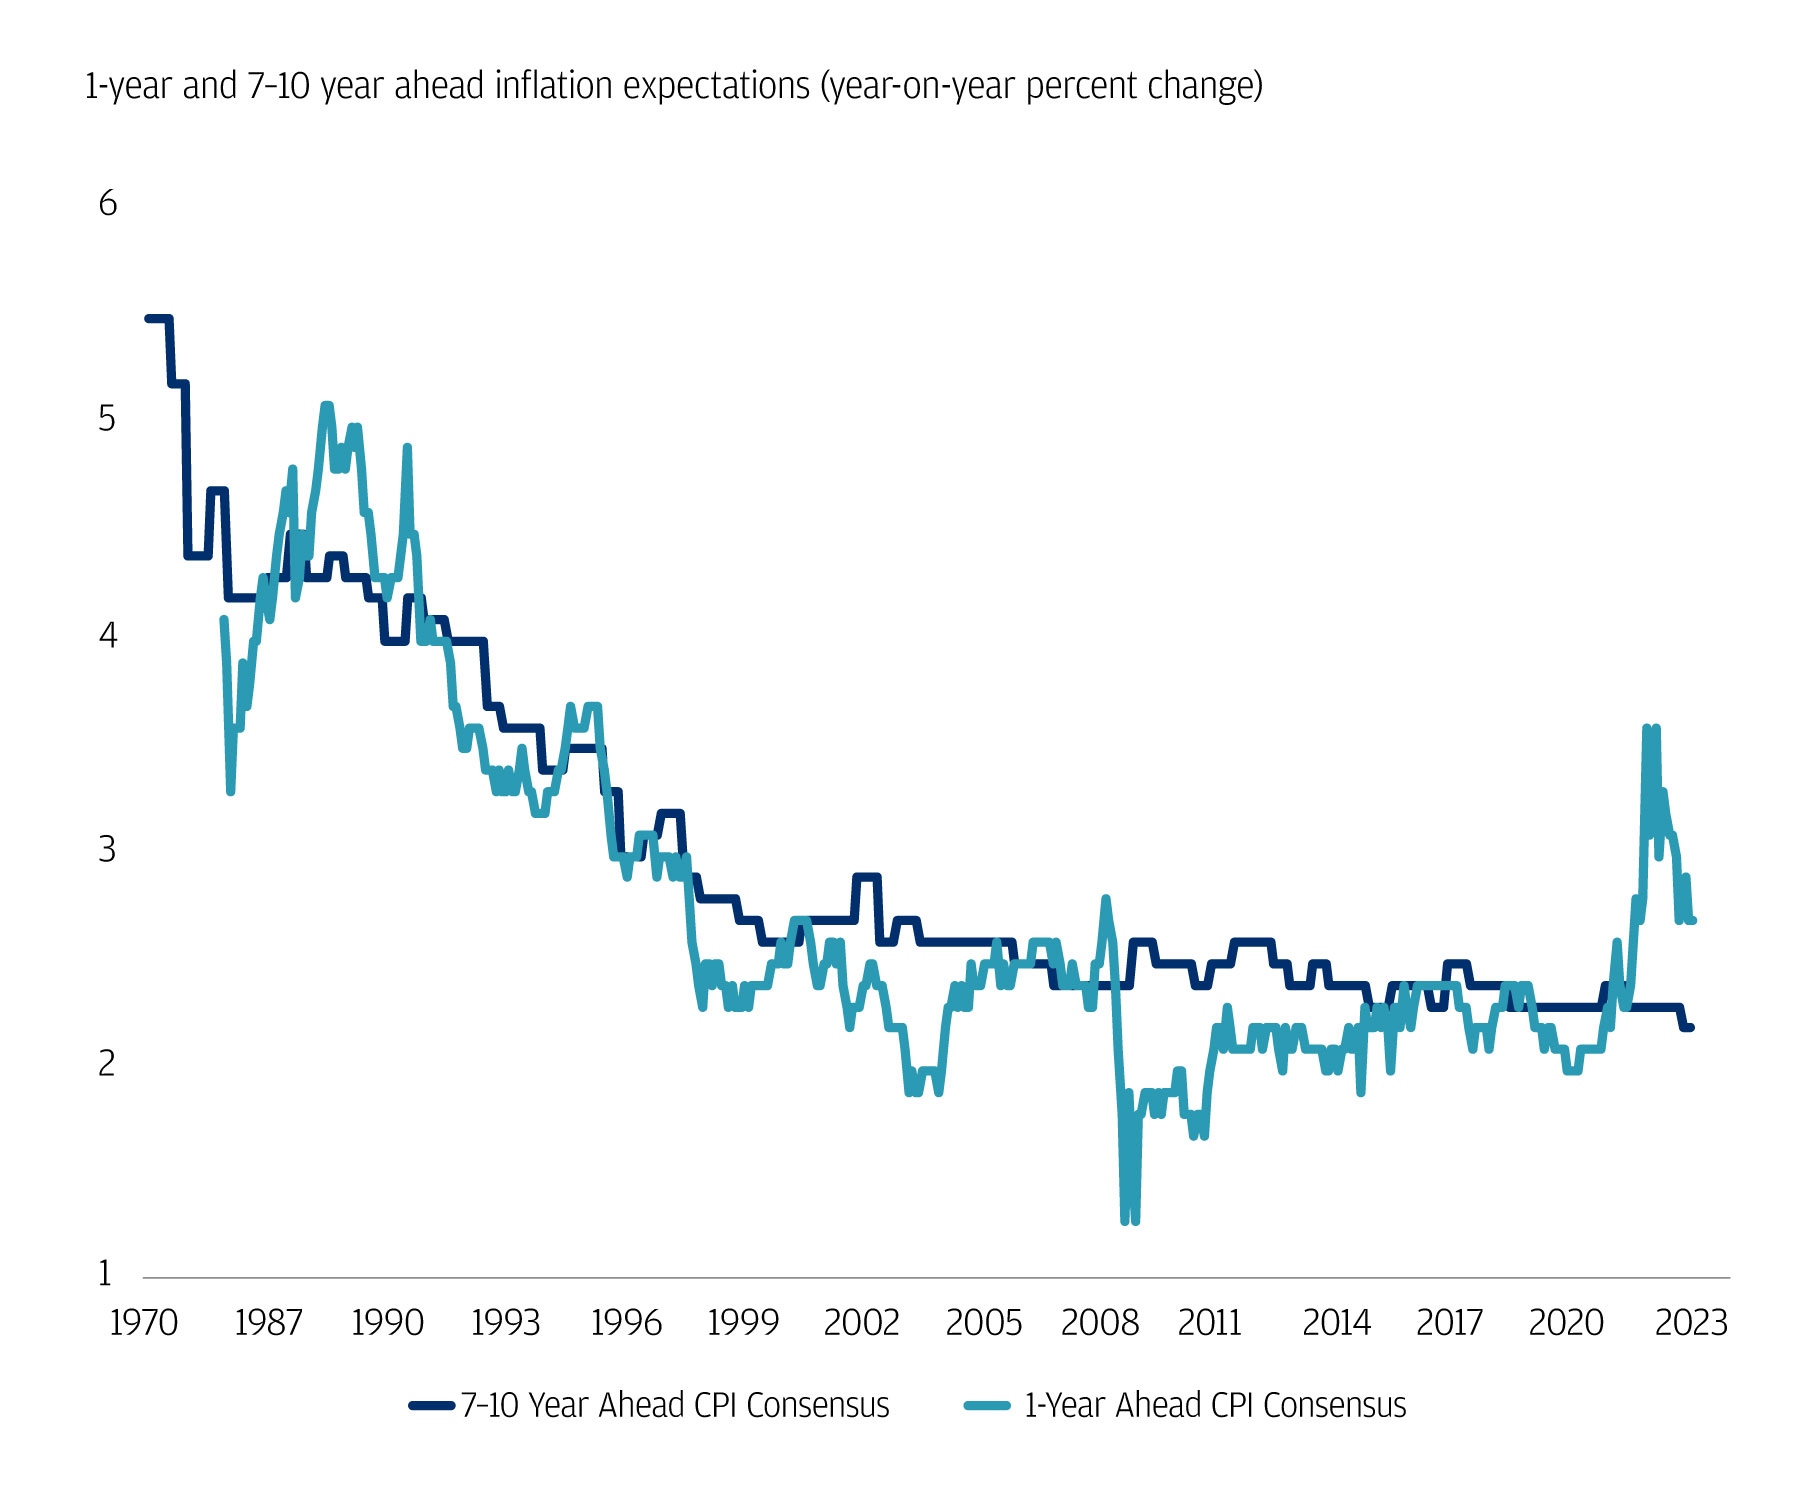 The pandemic brought tremendous short-run variability in inflation expectations, while long-run didn’t change